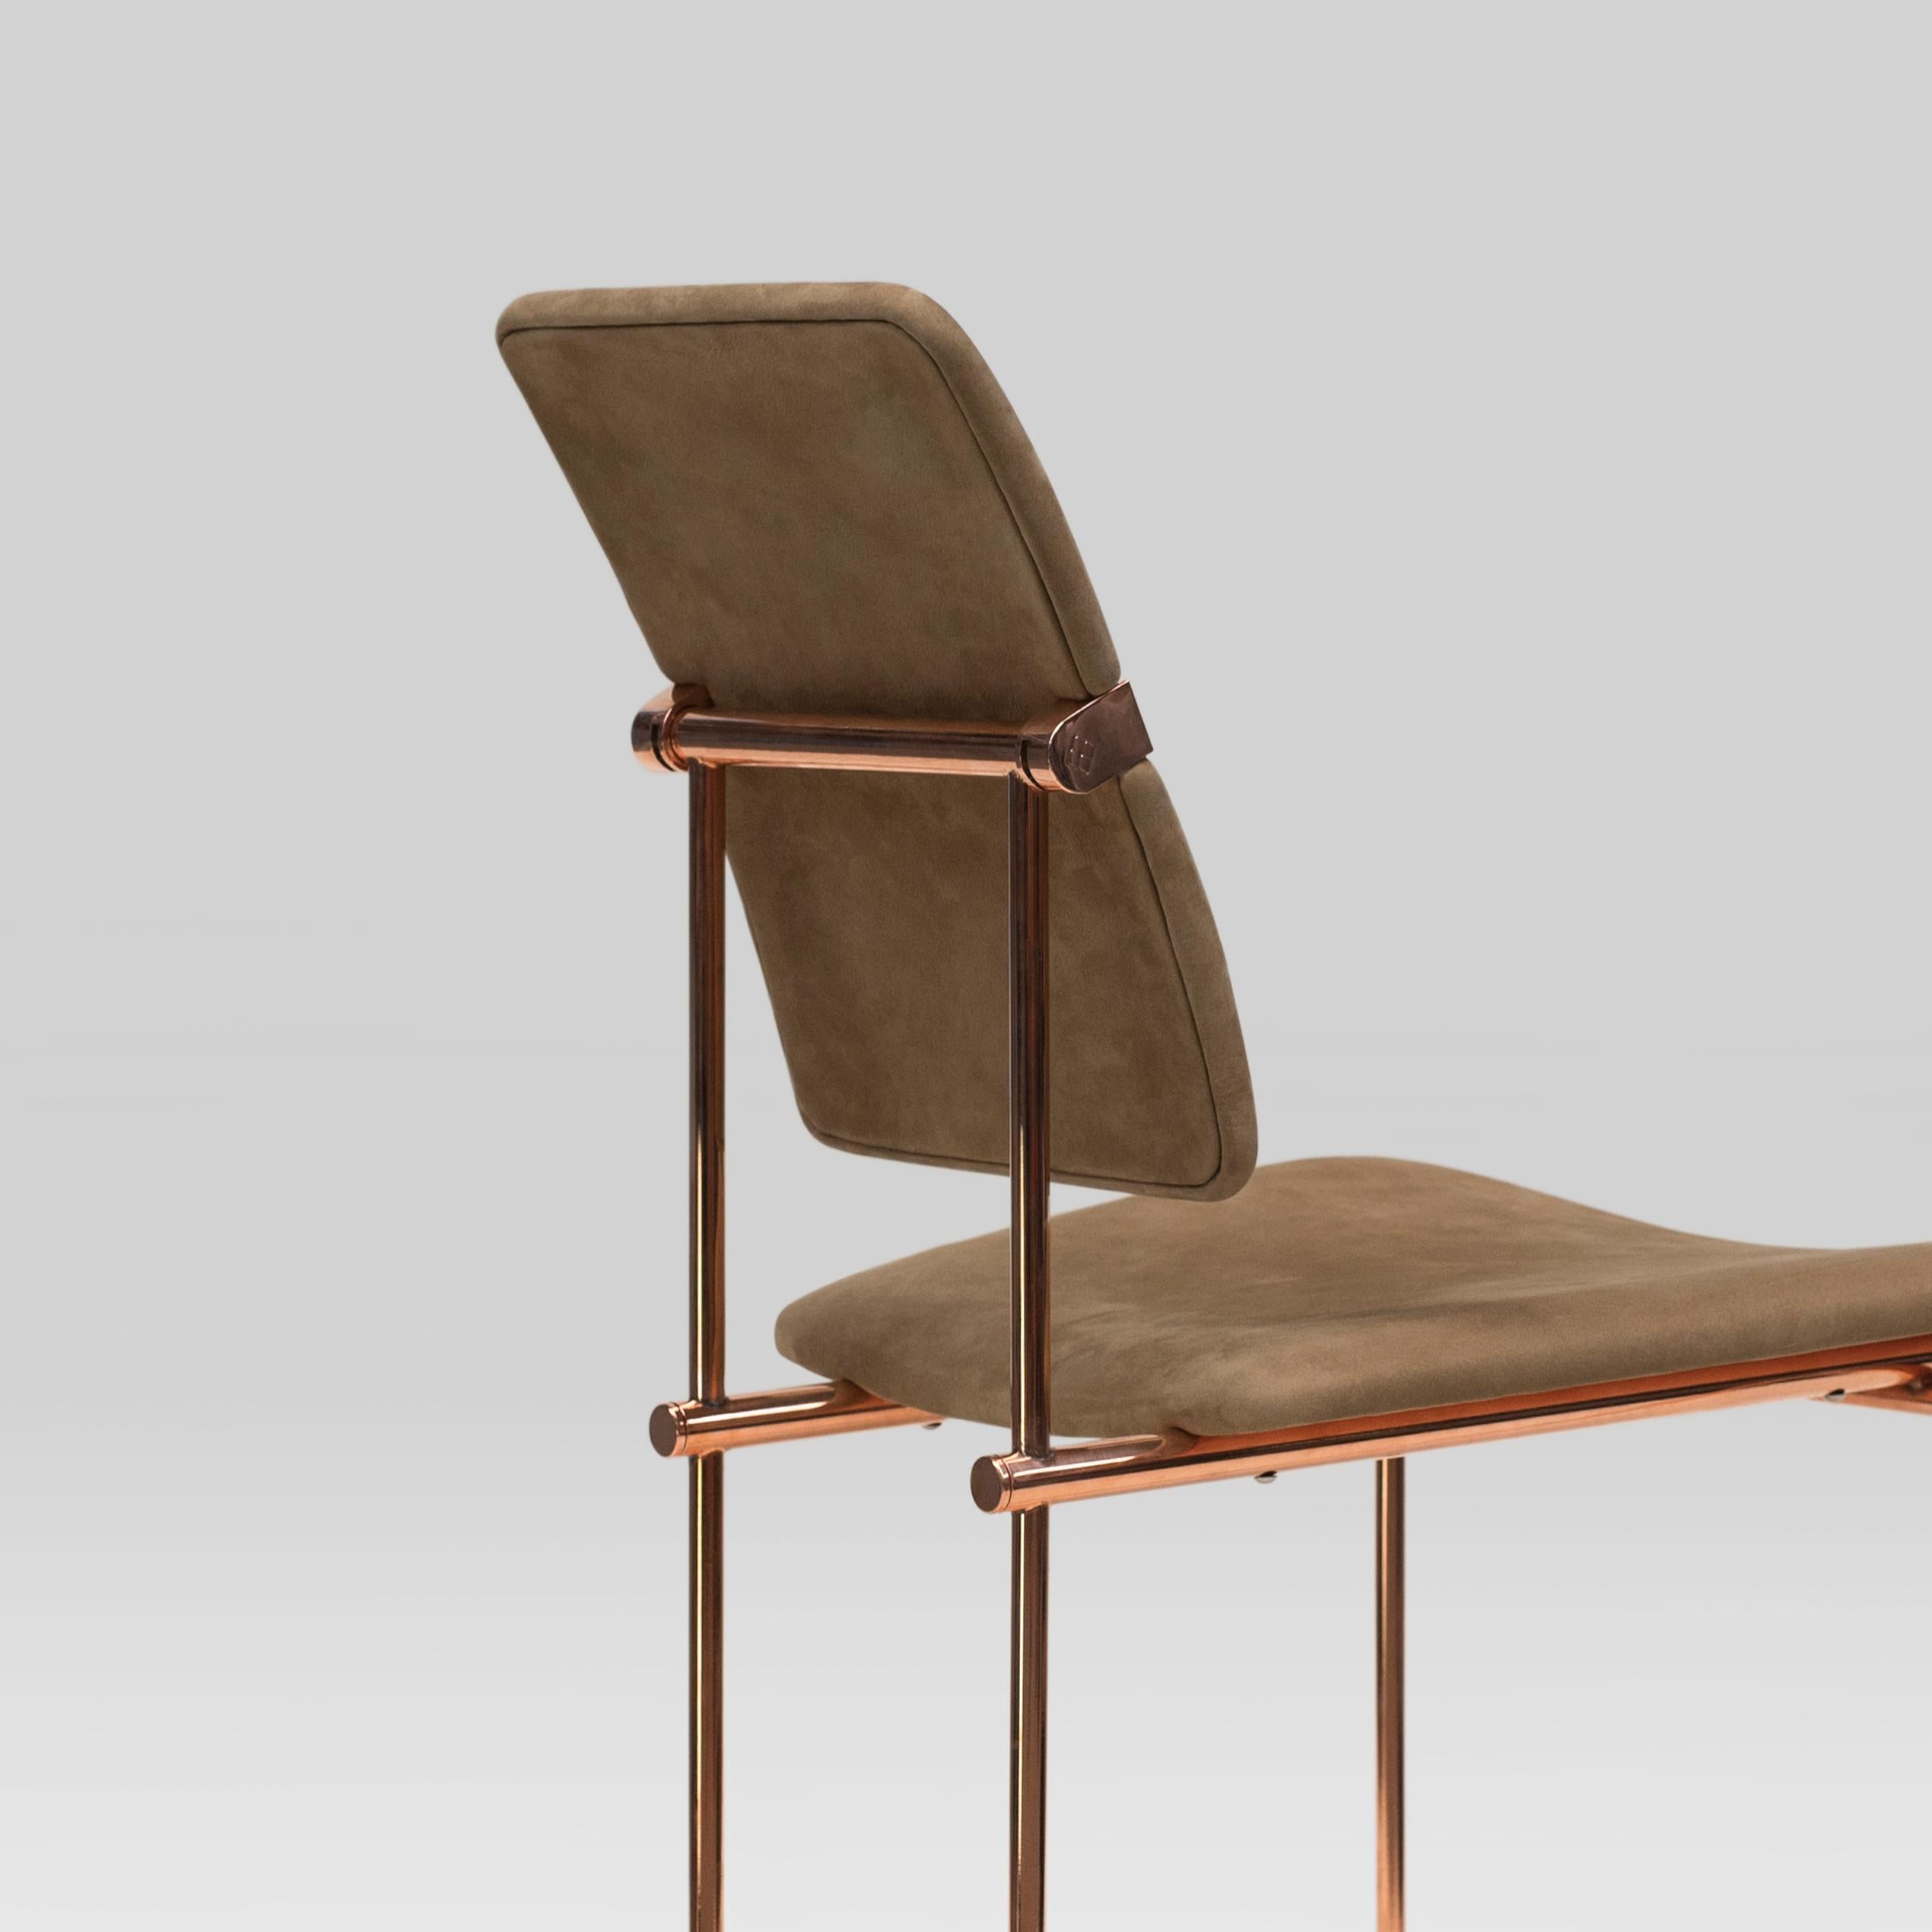 Modern Peter Ghyczy Chair Urban 'S02' Copper / Fabric Limited Edition